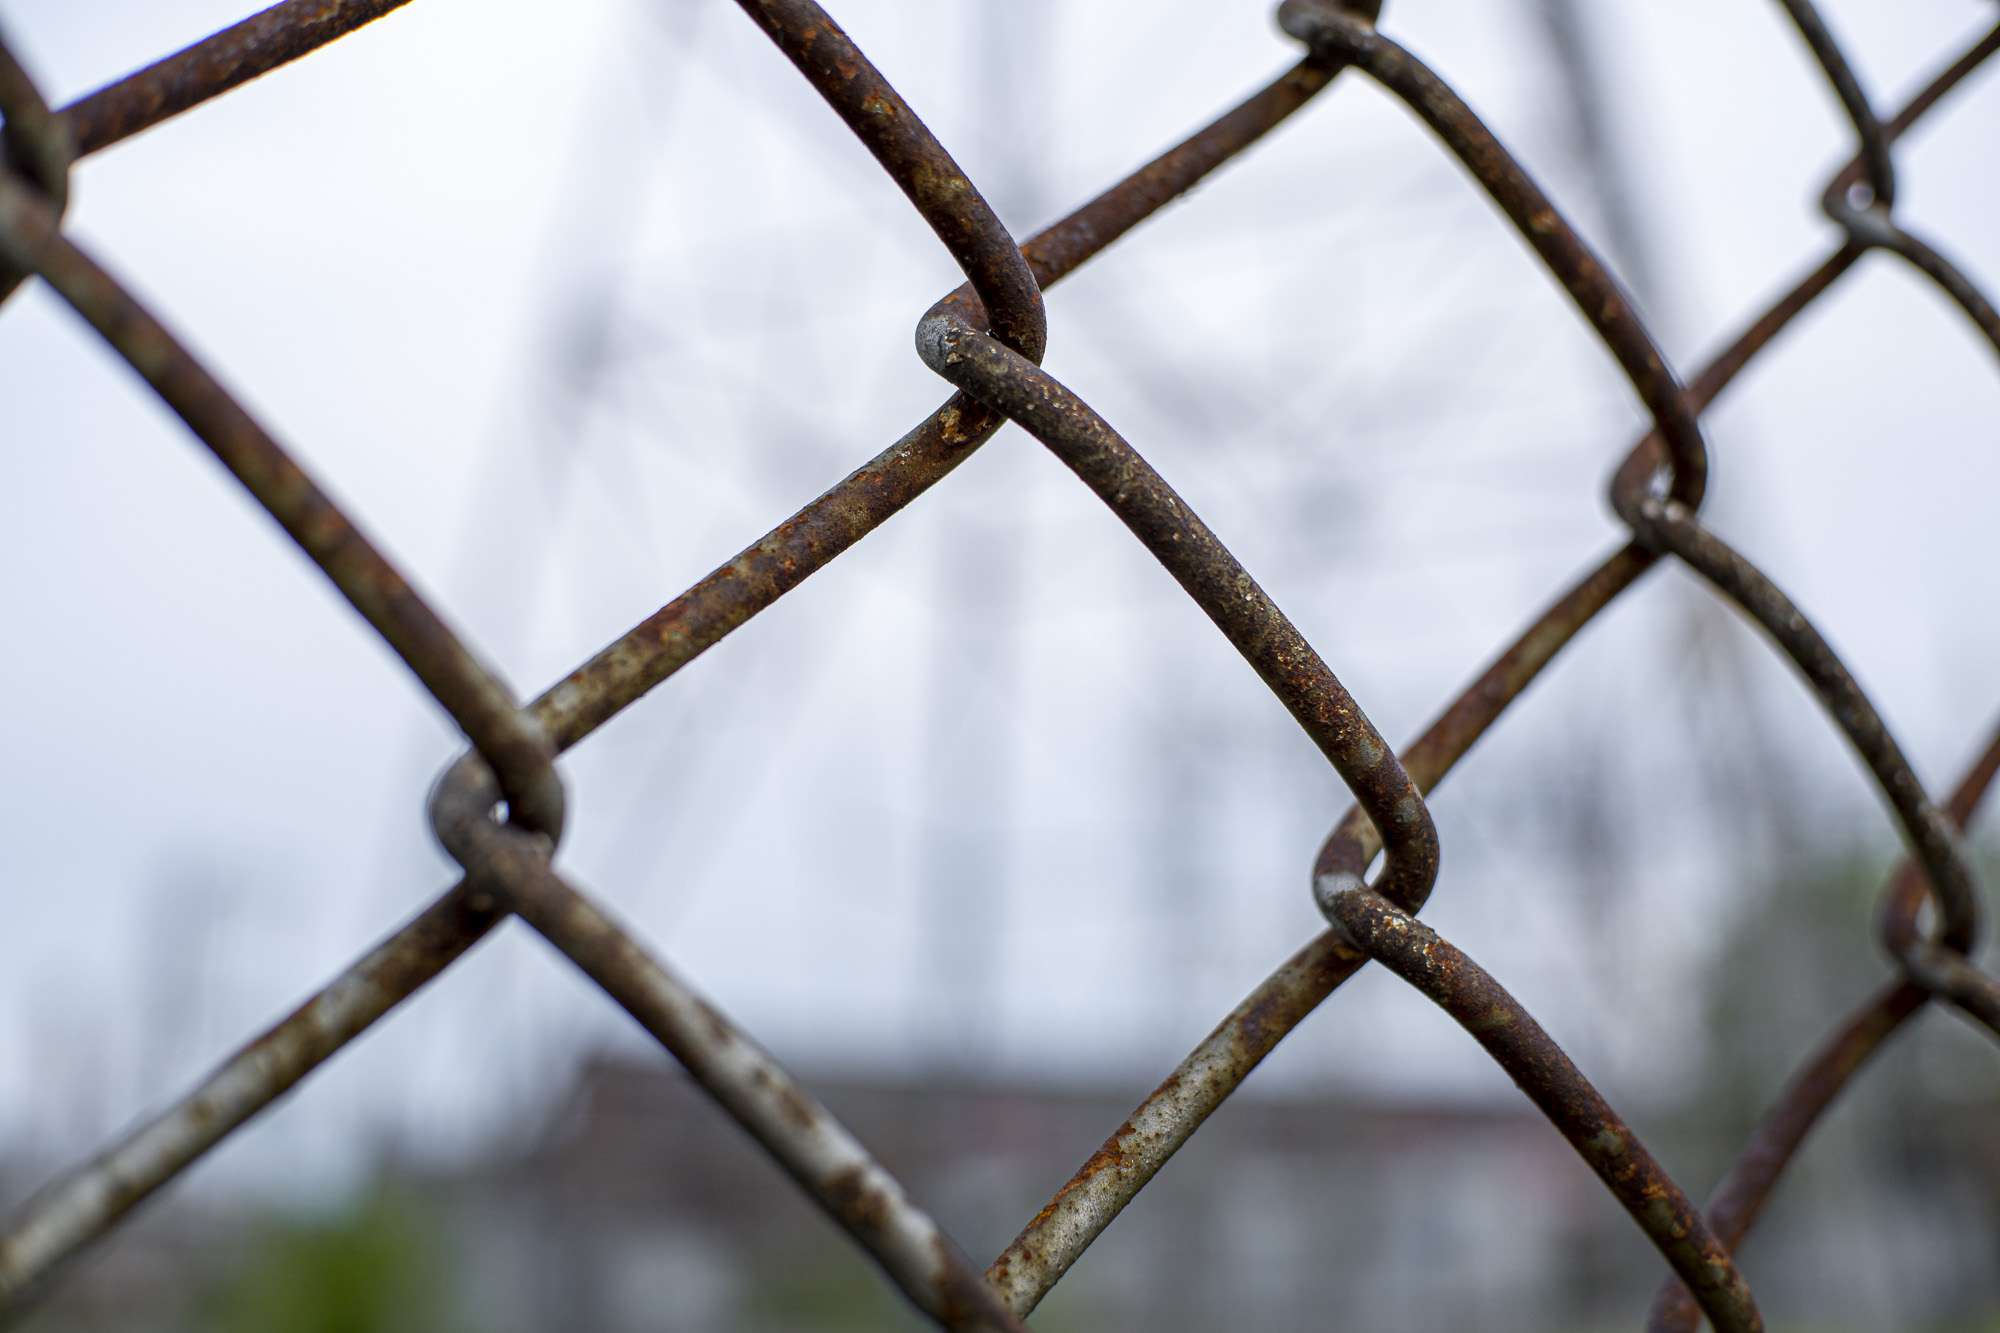 image of a fence with the background blurred out